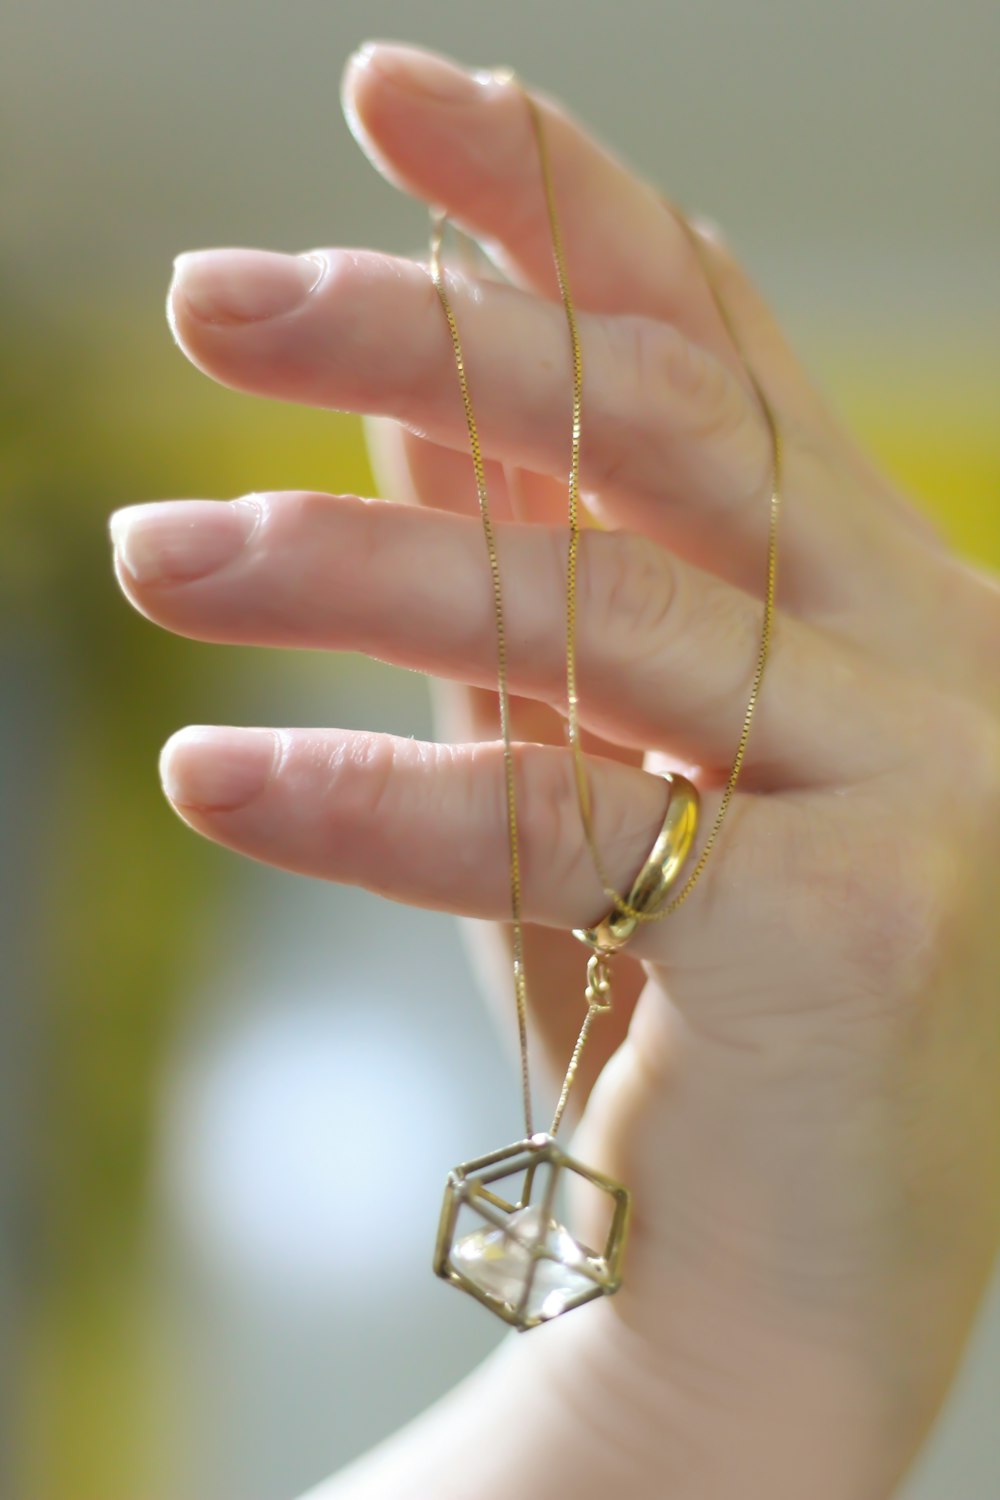 shallow focus photo of person holding gold-colored necklace with pendant